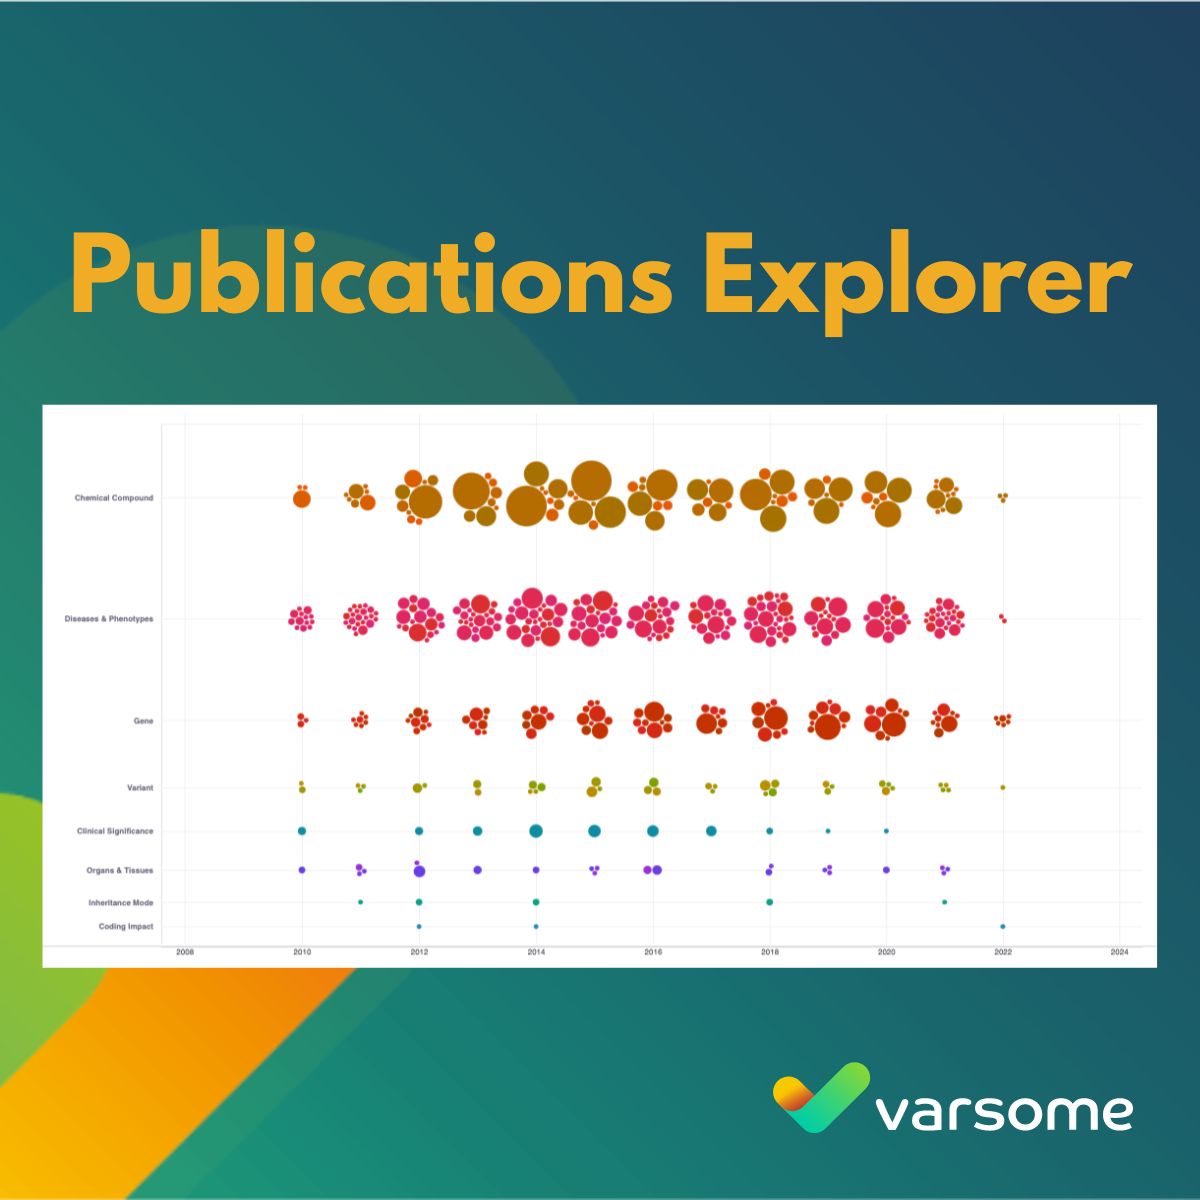 Visualize publication trends with our publications timeline viewer, displaying data on PubMed articles relating to your gene or variant of interest. Try it today: varsome.com